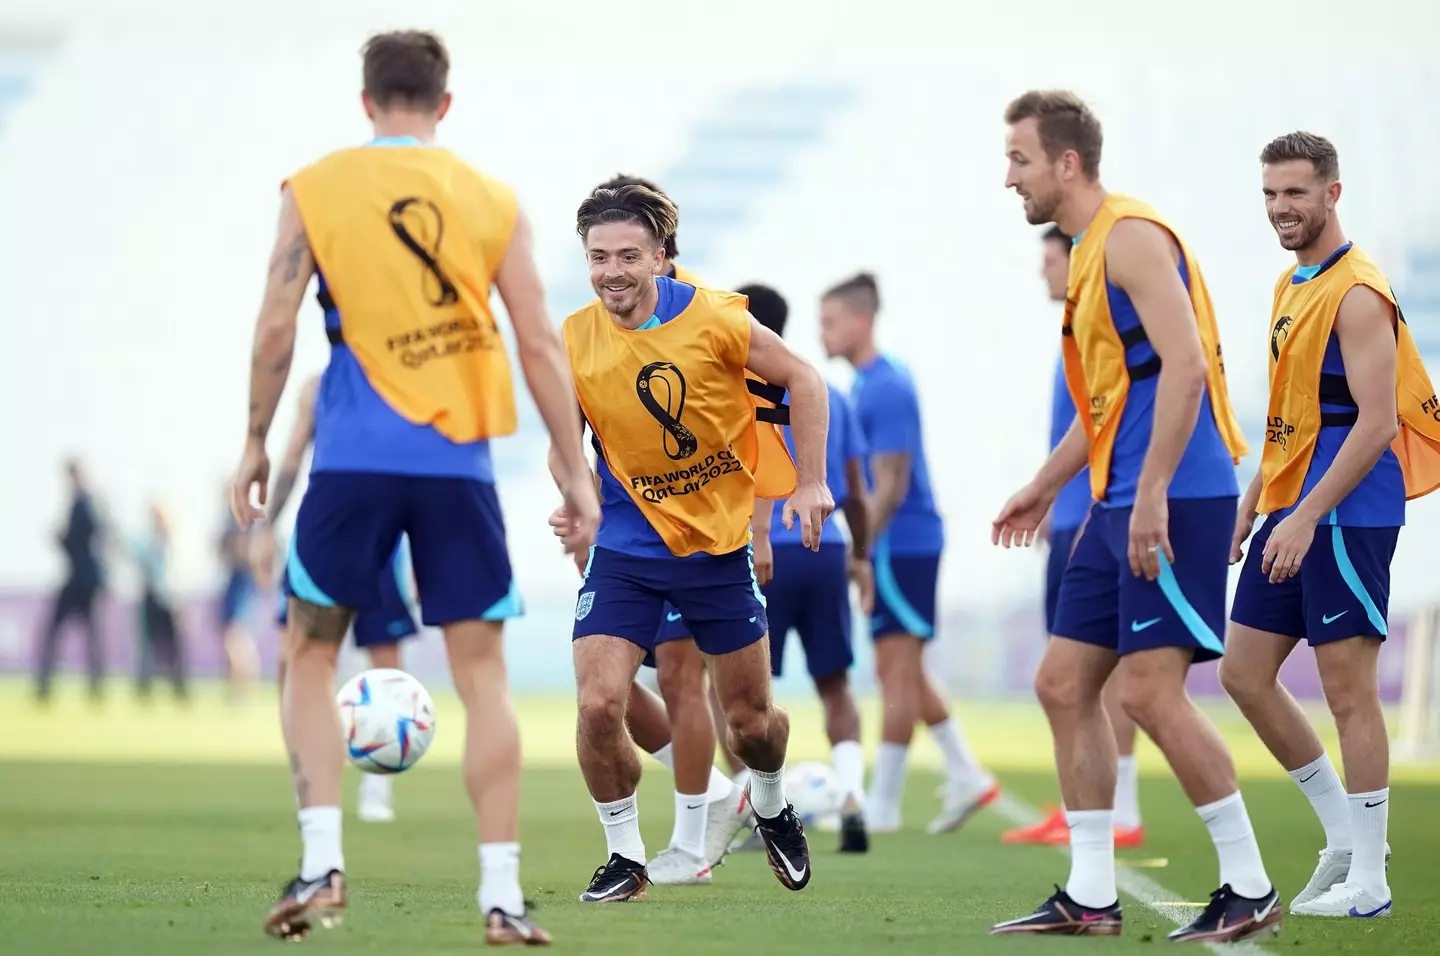 Manchester City star Jack Grealish is making his first appearance at a World Cup with England.